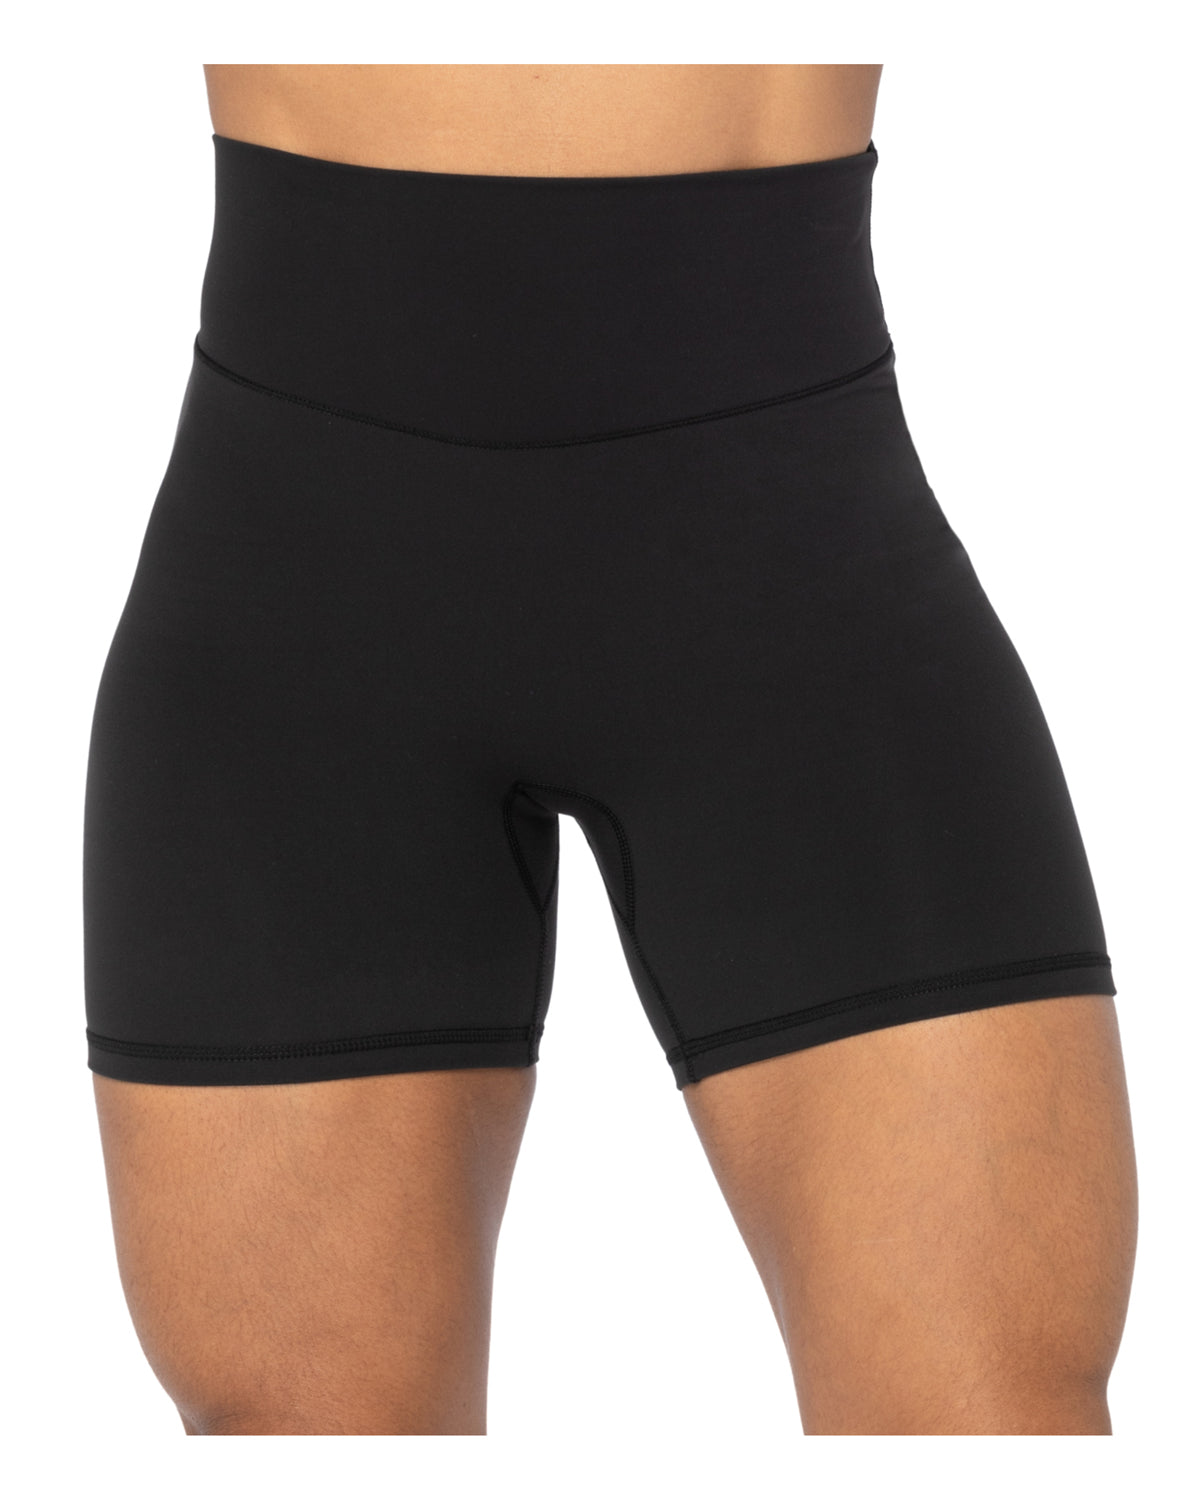  High Waisted Biker Shorts Shorts with Spandex